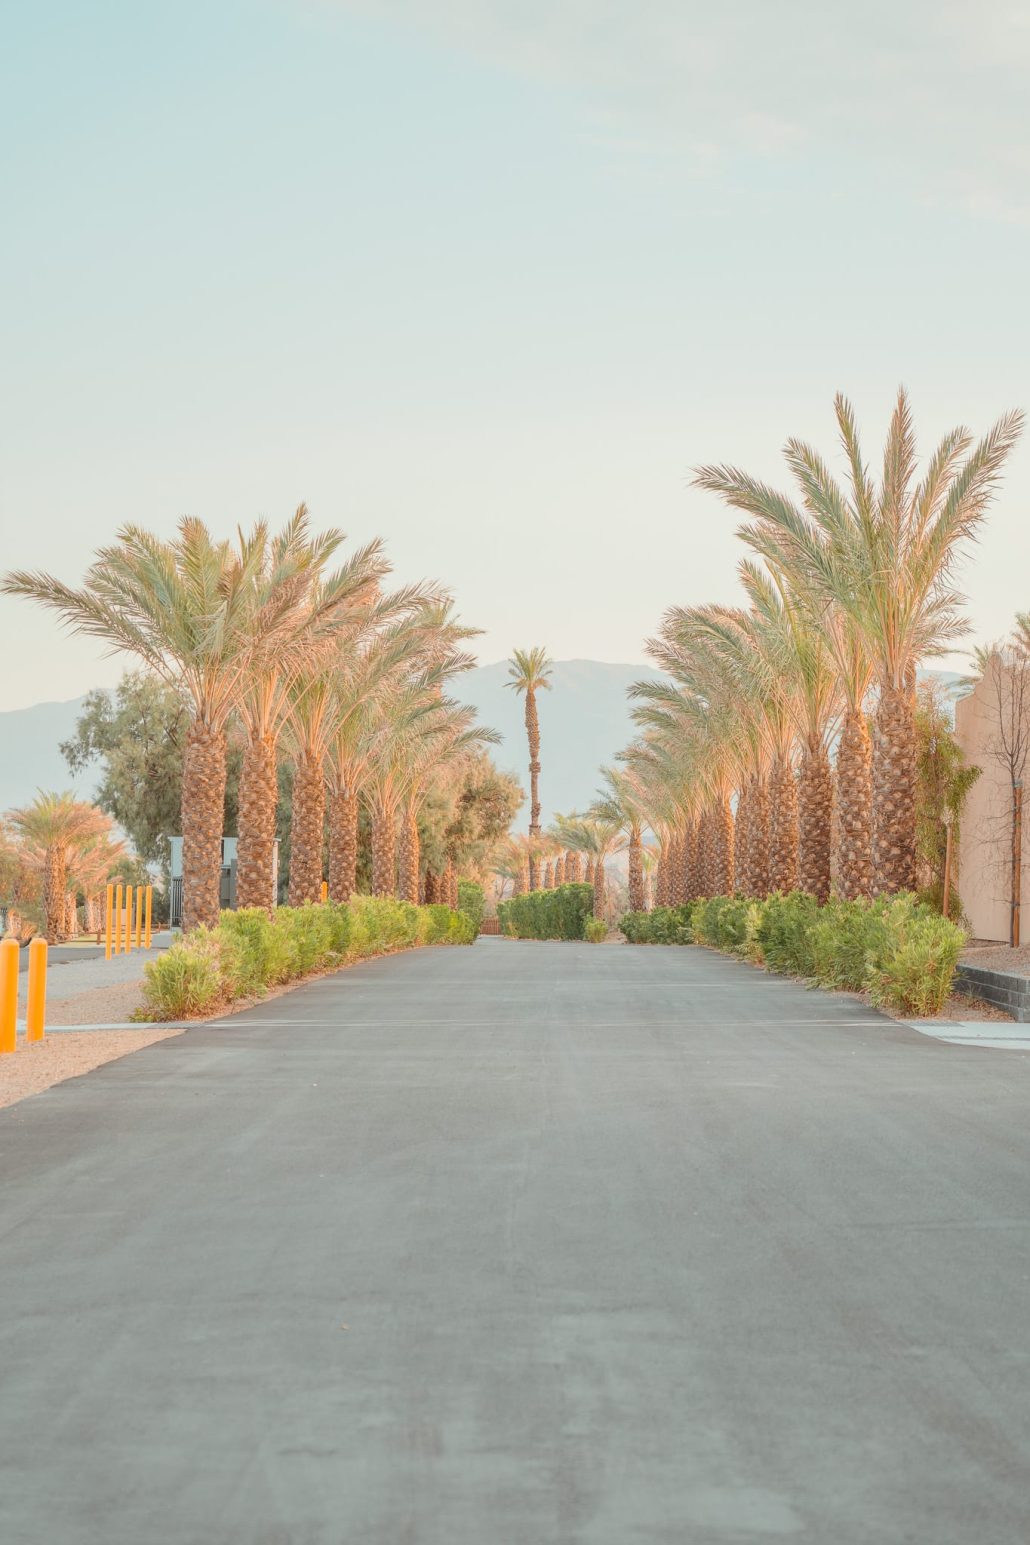 Palm trees alley – Death Valley